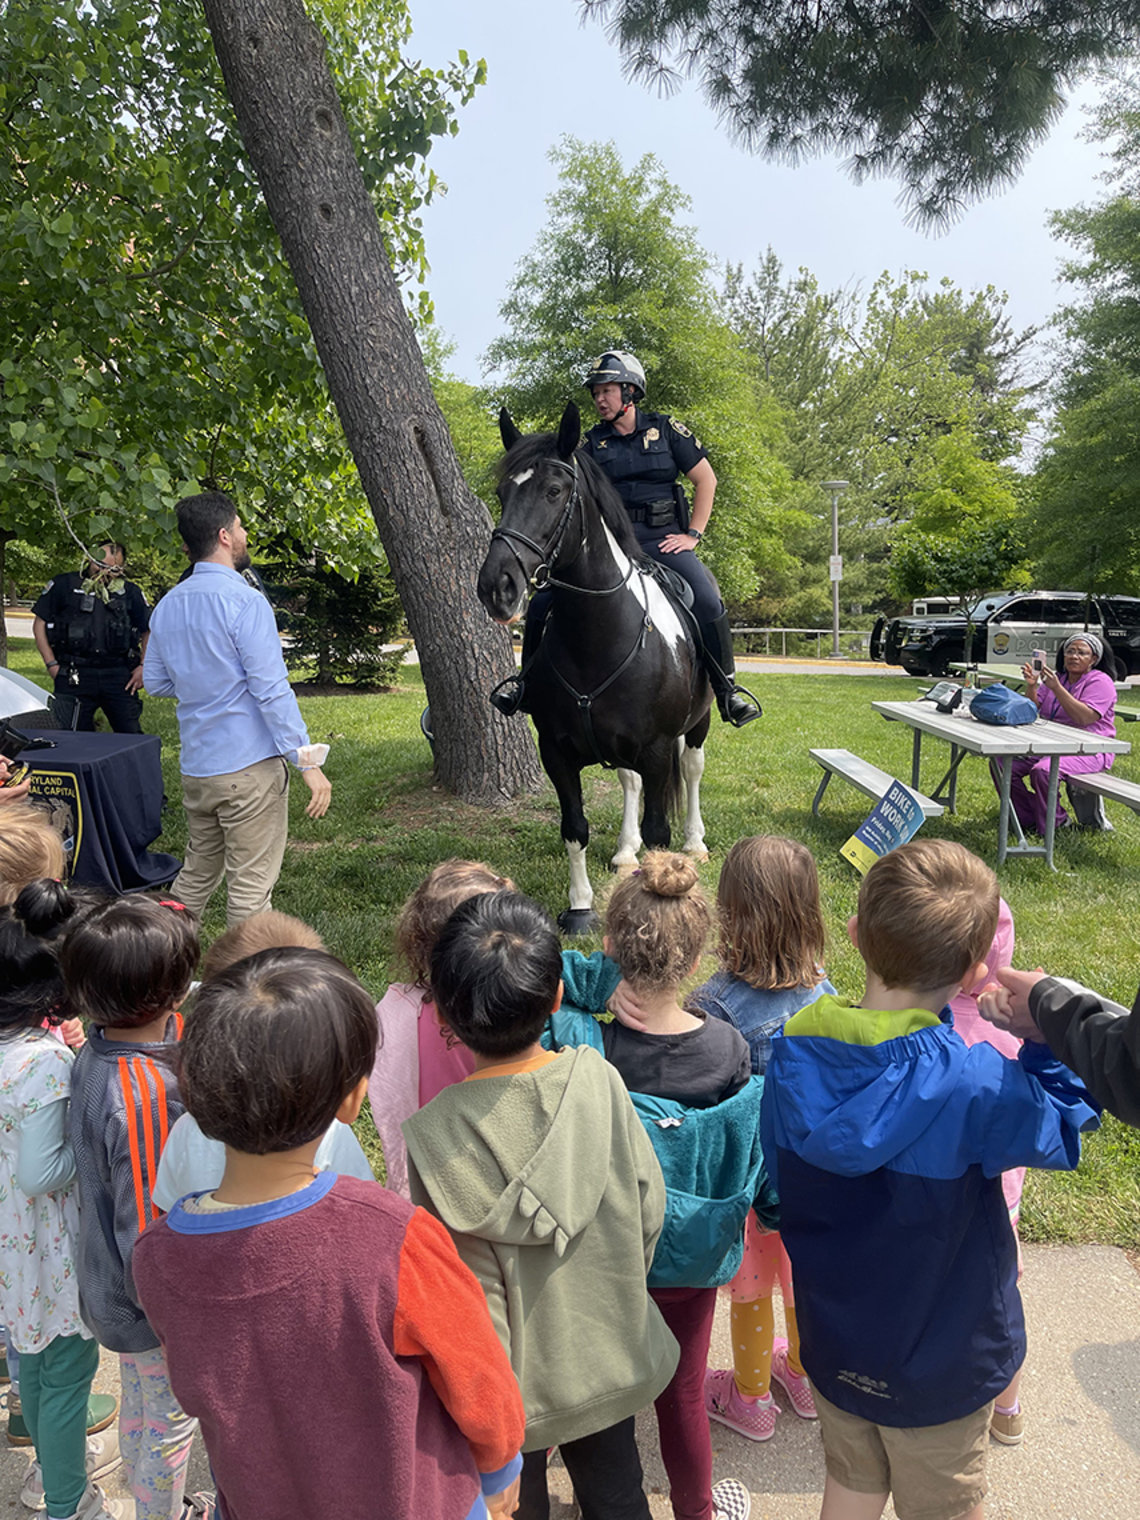 Officer on a horse, as kids and a man look on.